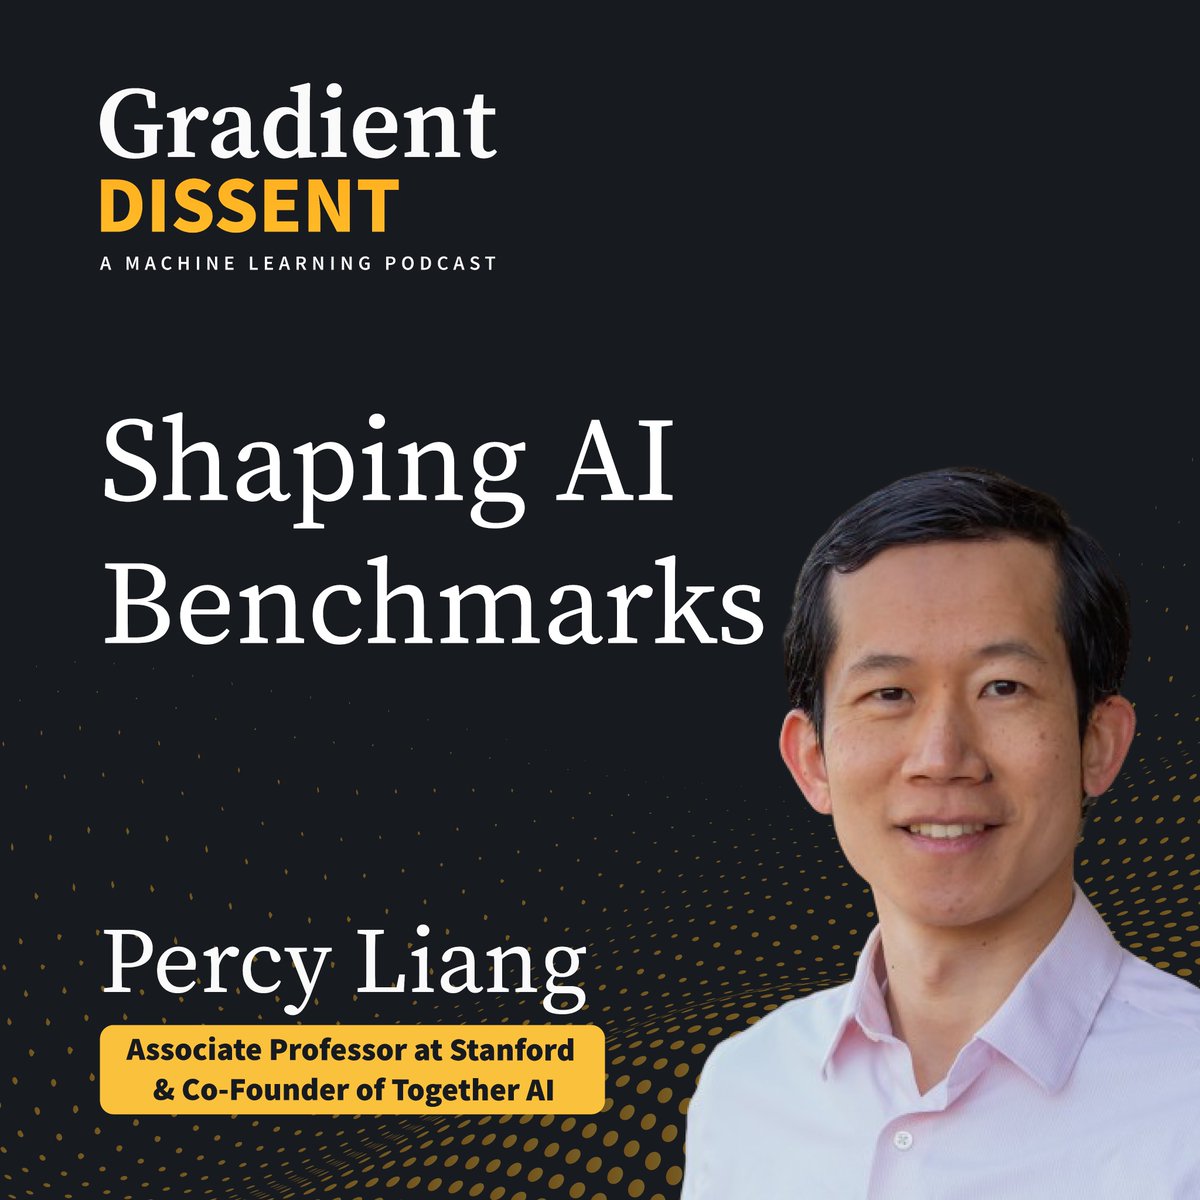 🎧New #GradientDissent episode tomorrow! Join us with @togethercompute co-founder and @Stanford Professor @percyliang to discuss advancements in AI benchmarking and open-source's pivotal role in AI development.